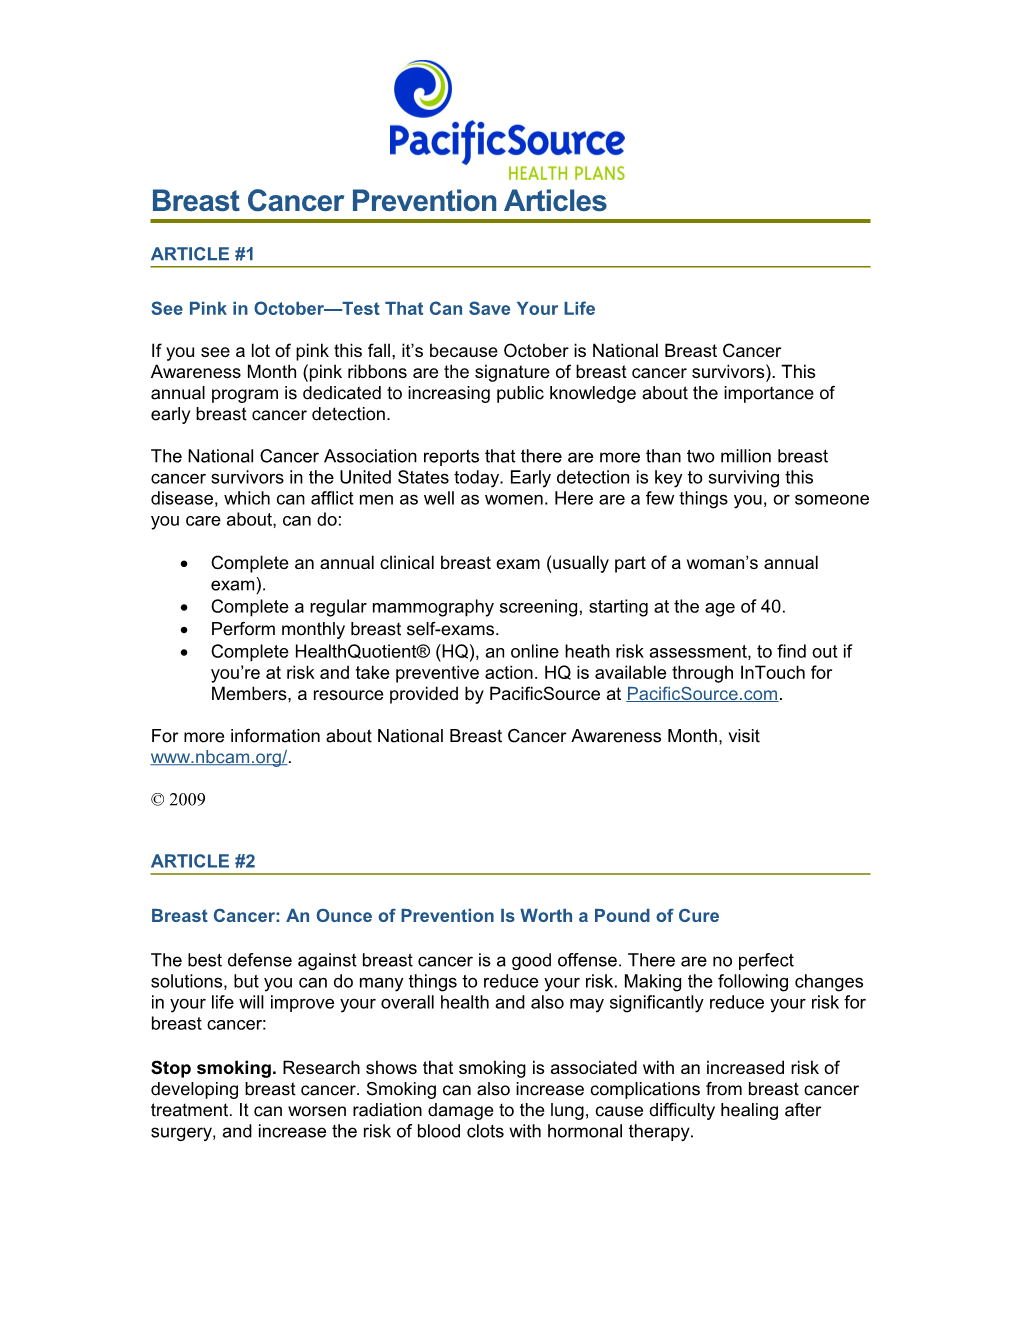 Breast Cancer Prevention (Three Articles)